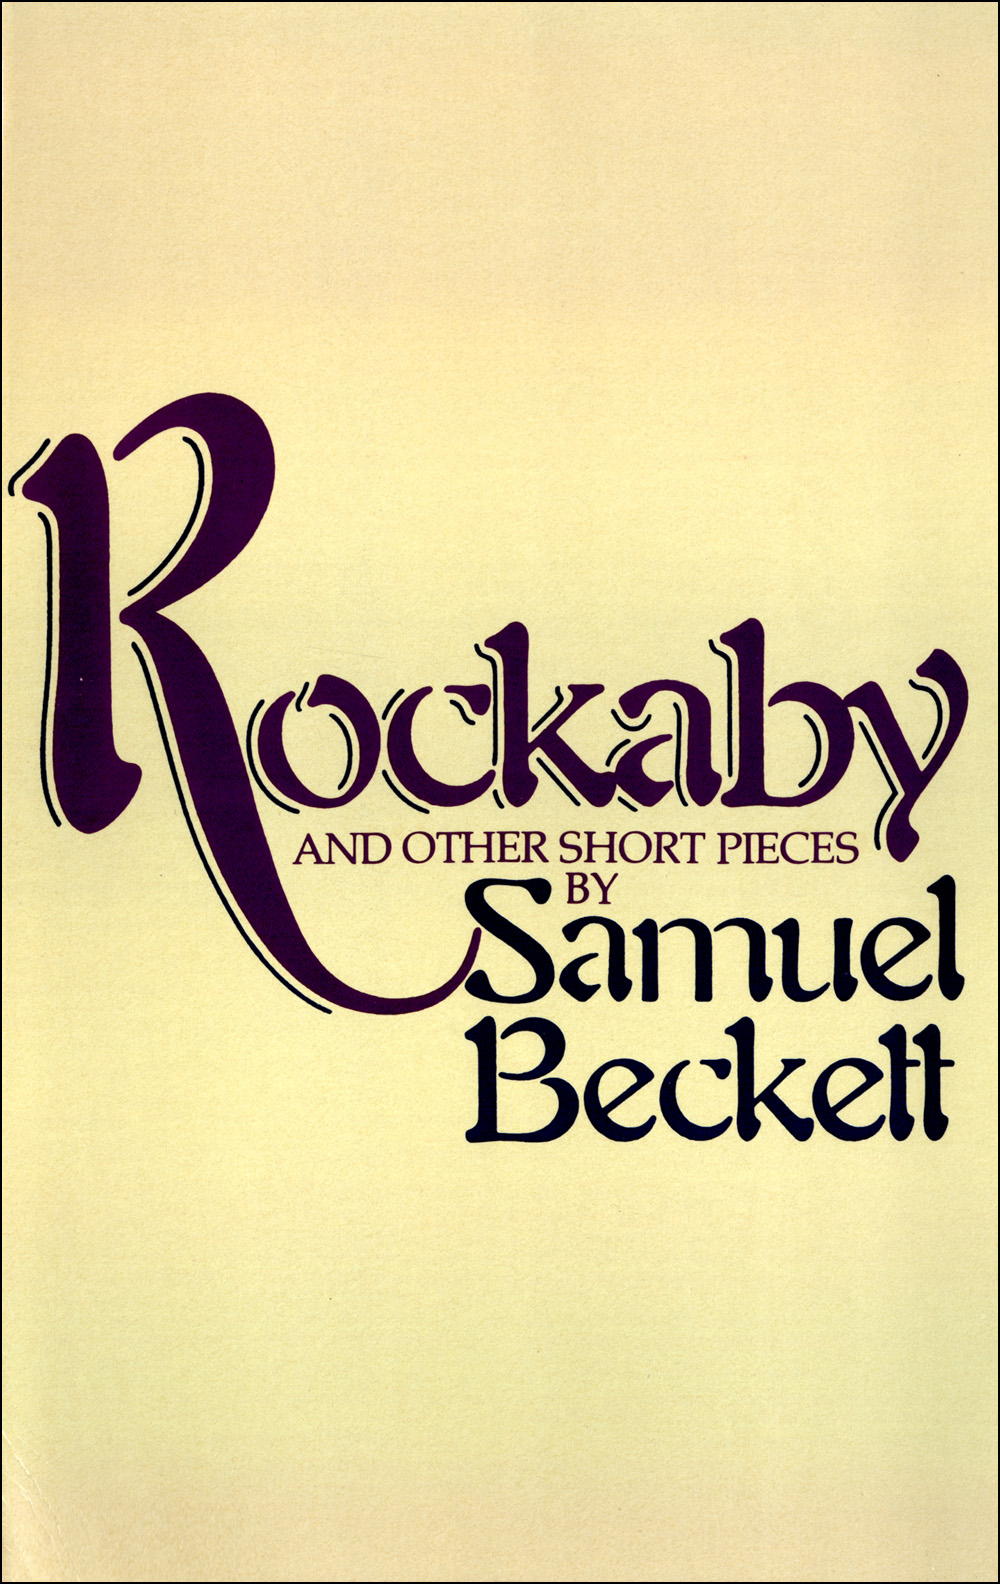 Rockabye and Other Short Pieces (1981) by Samuel Beckett